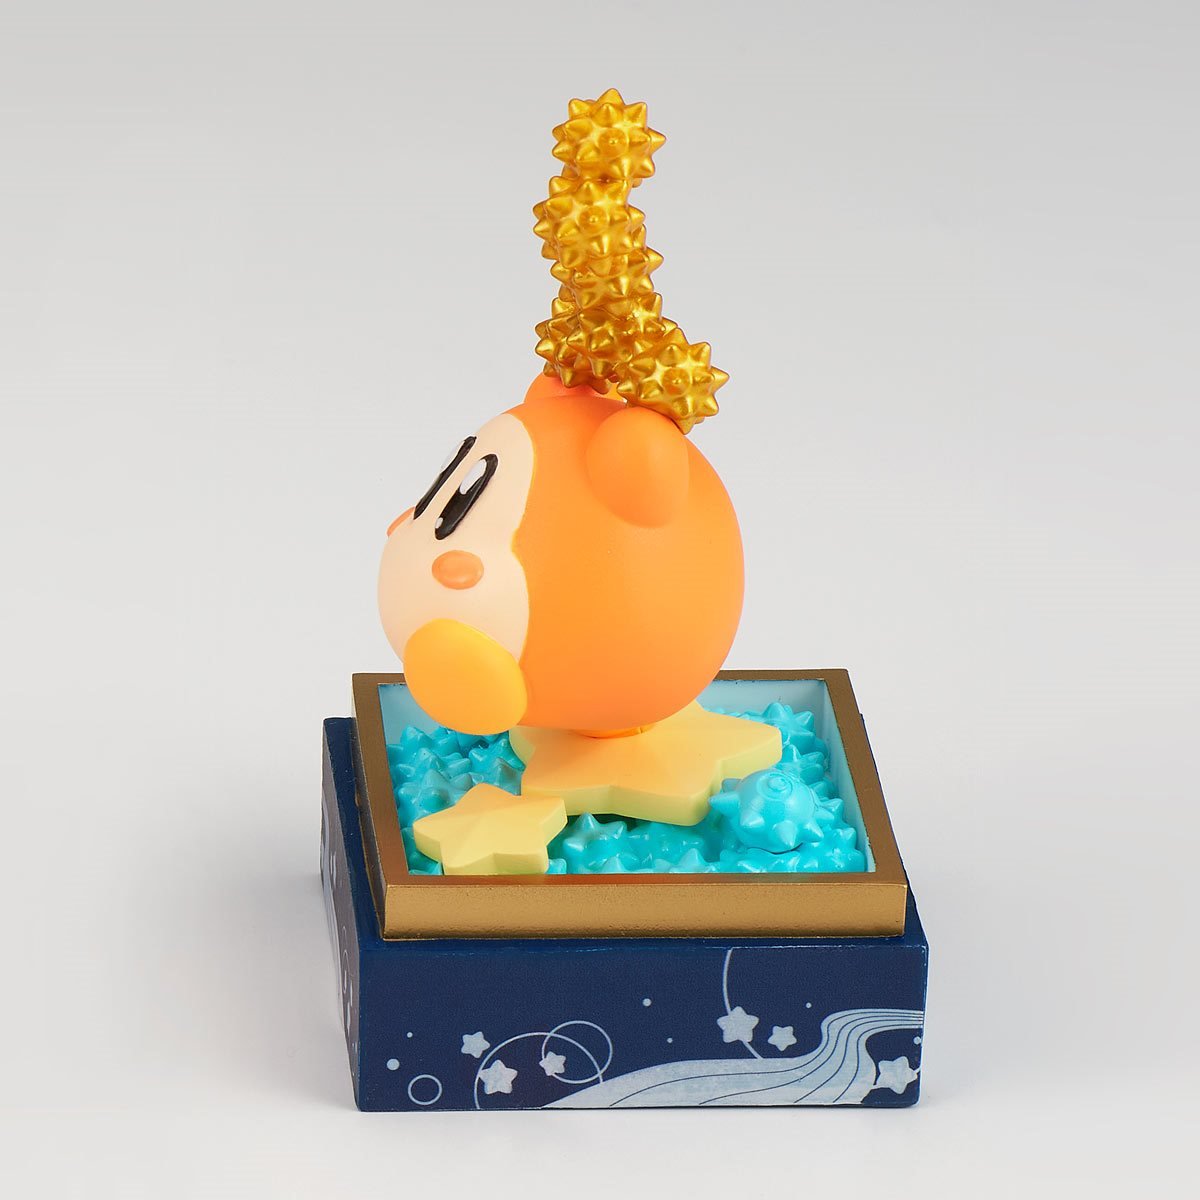 Banpresto - Kirby Waddle Dee Paldolce Collection Vol.5 (Ver.C) - Good Game Anime